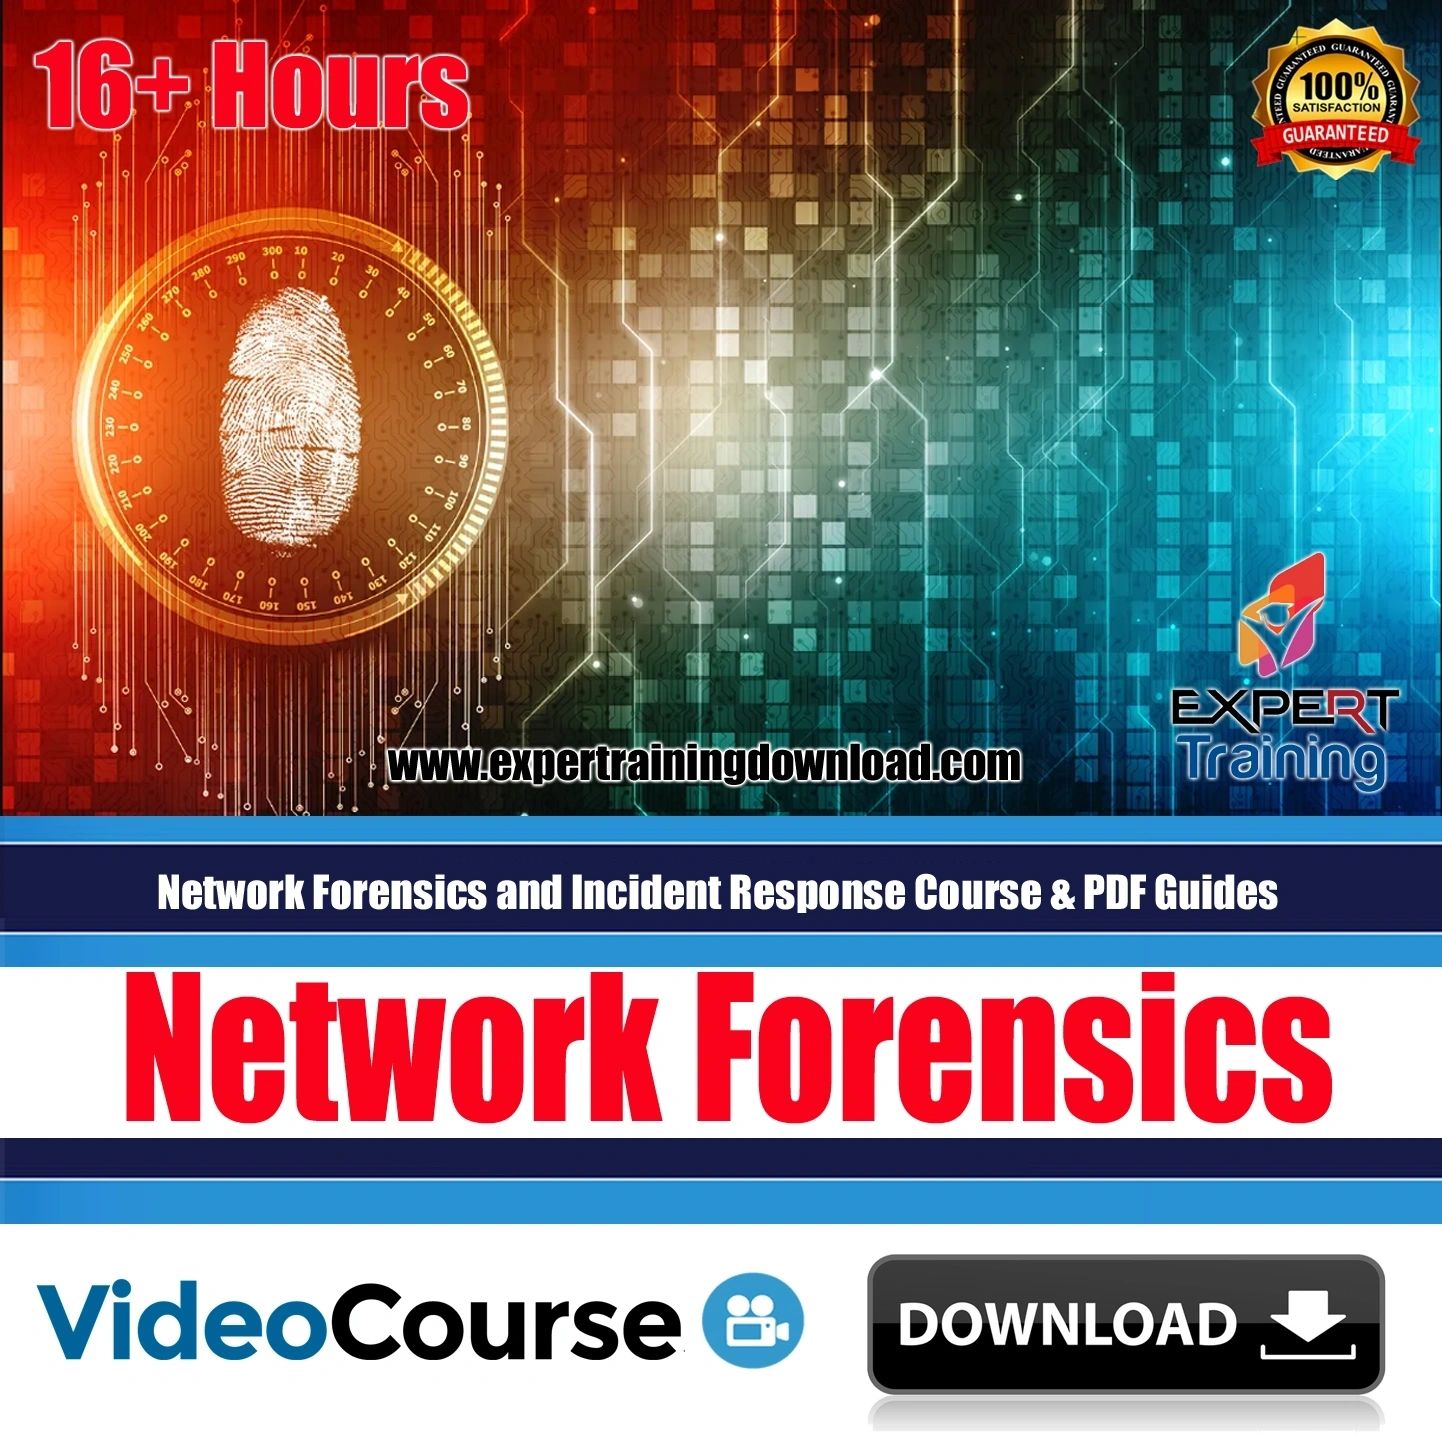 Network Forensics and Incident Response Course & PDF Guides